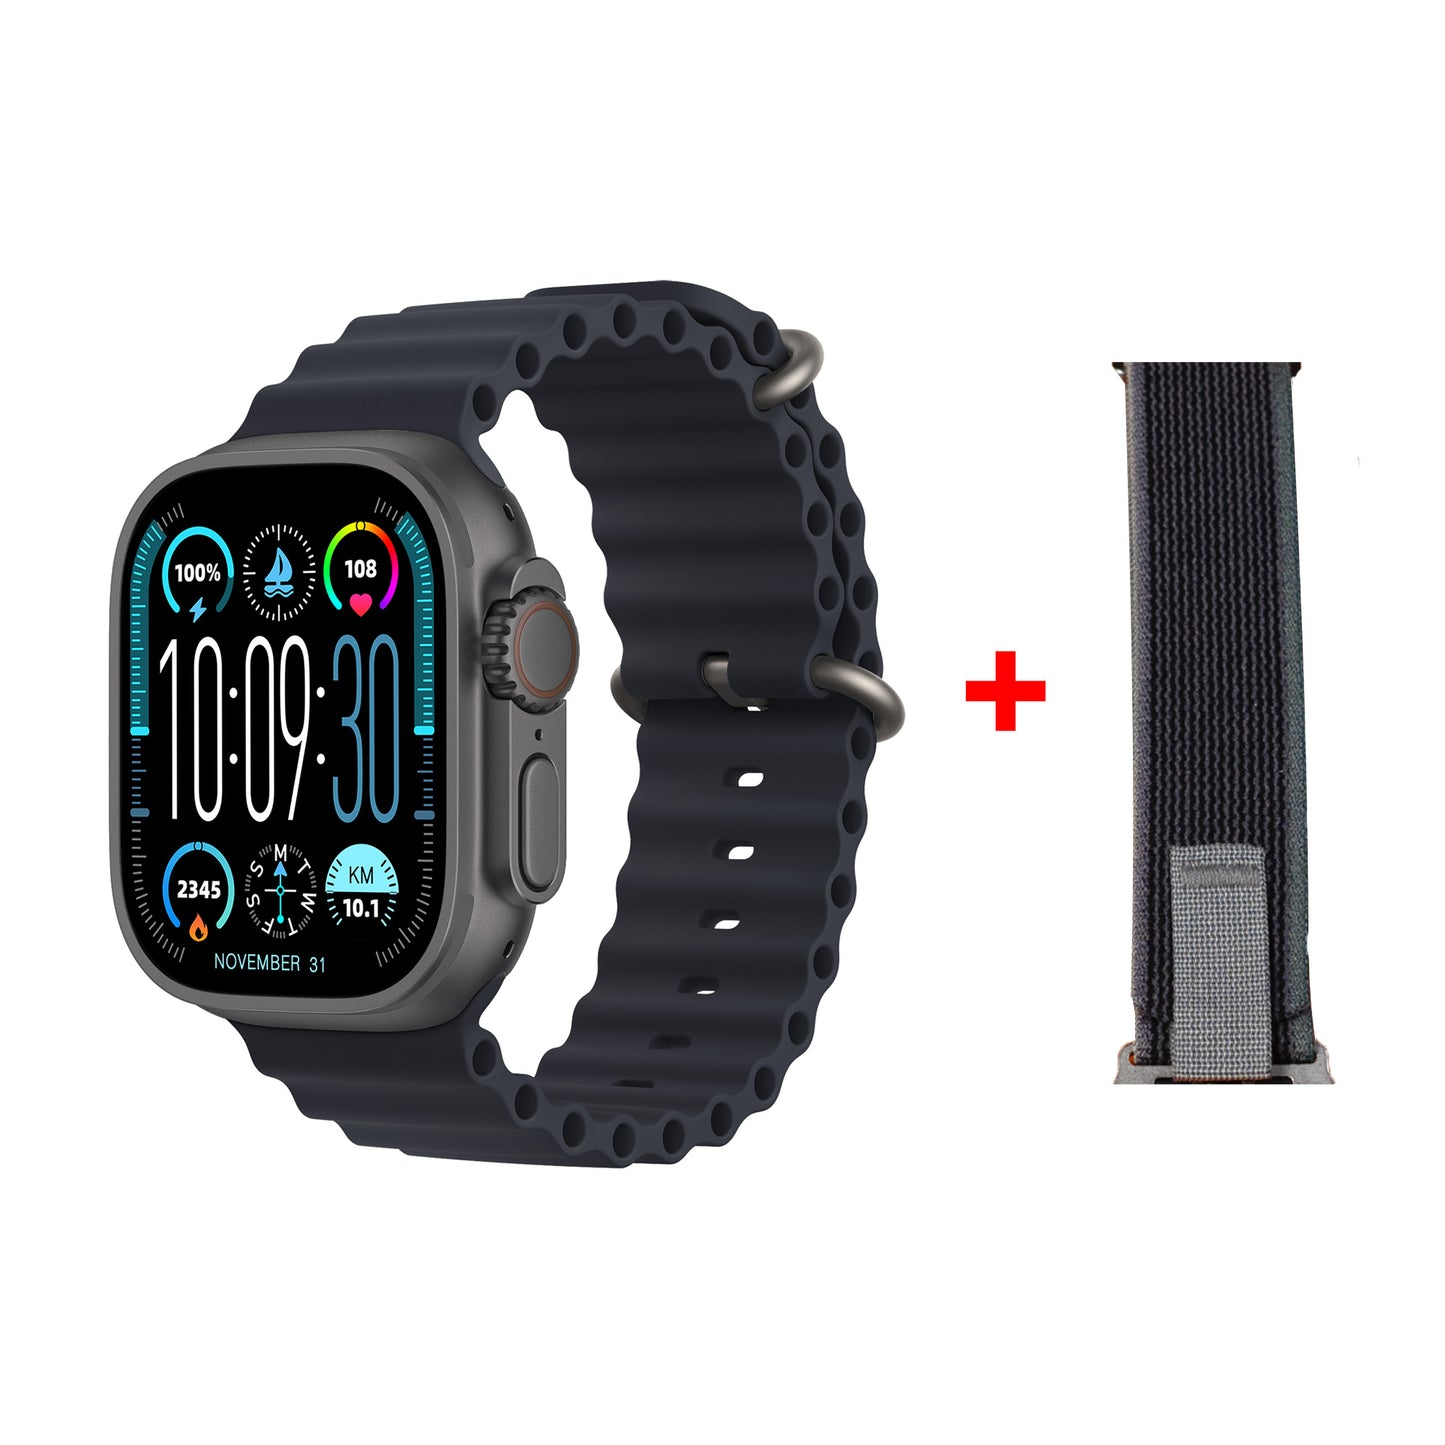 HK9 Ultra 2 Max Smartwatch 2.02" AMOLED Screen 1GB Rom Support Local Music TWS Connection